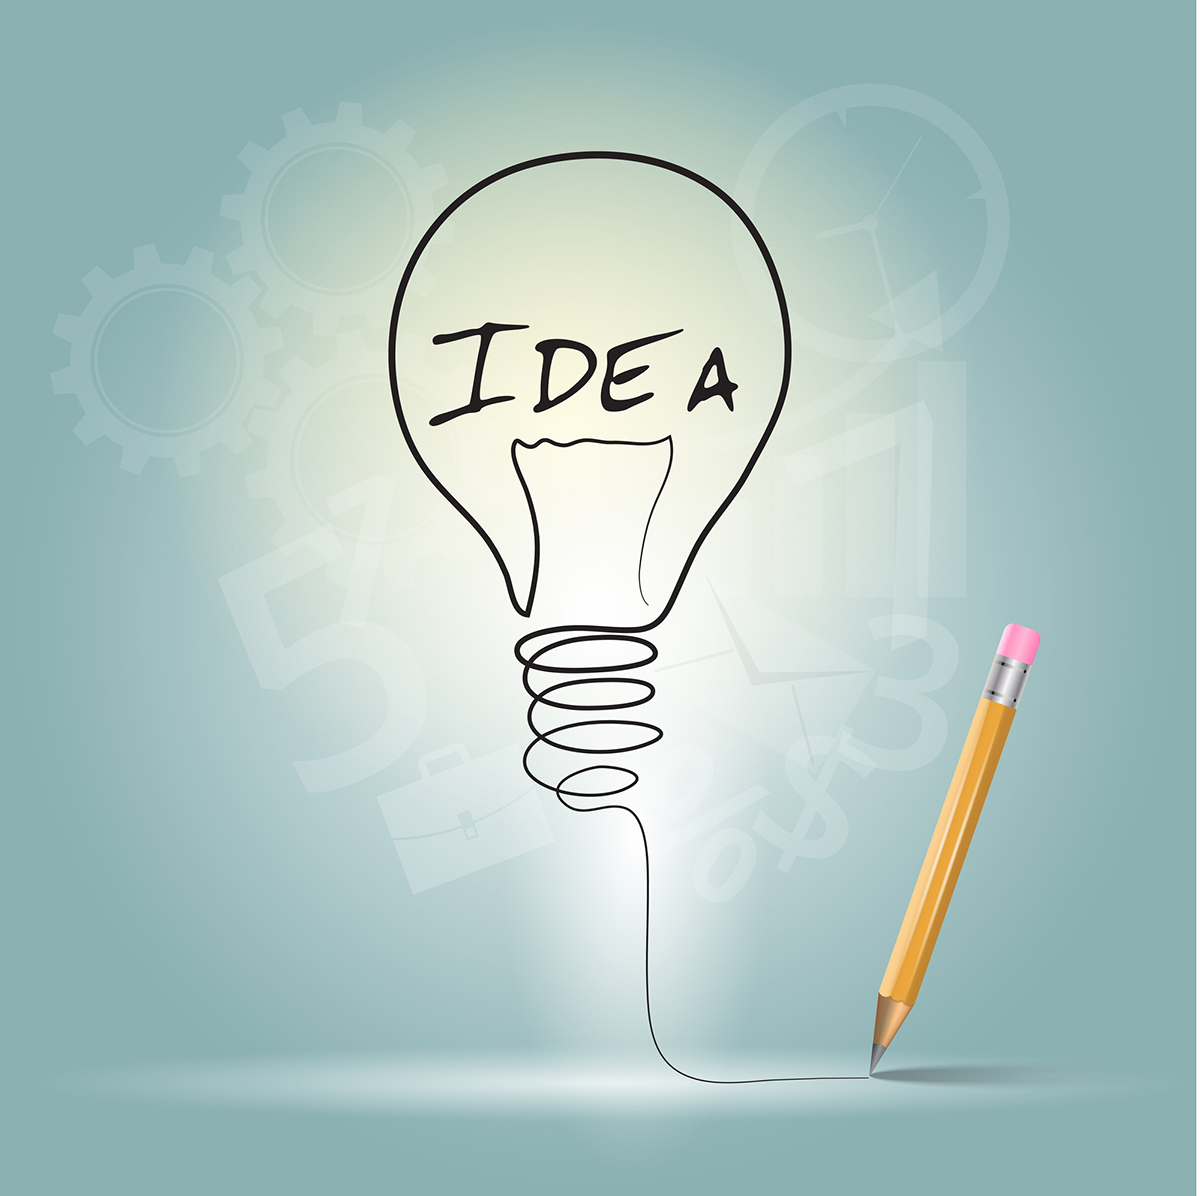 A yellow pencil beside a doodle of a light bulb with the word "IDEA" in it